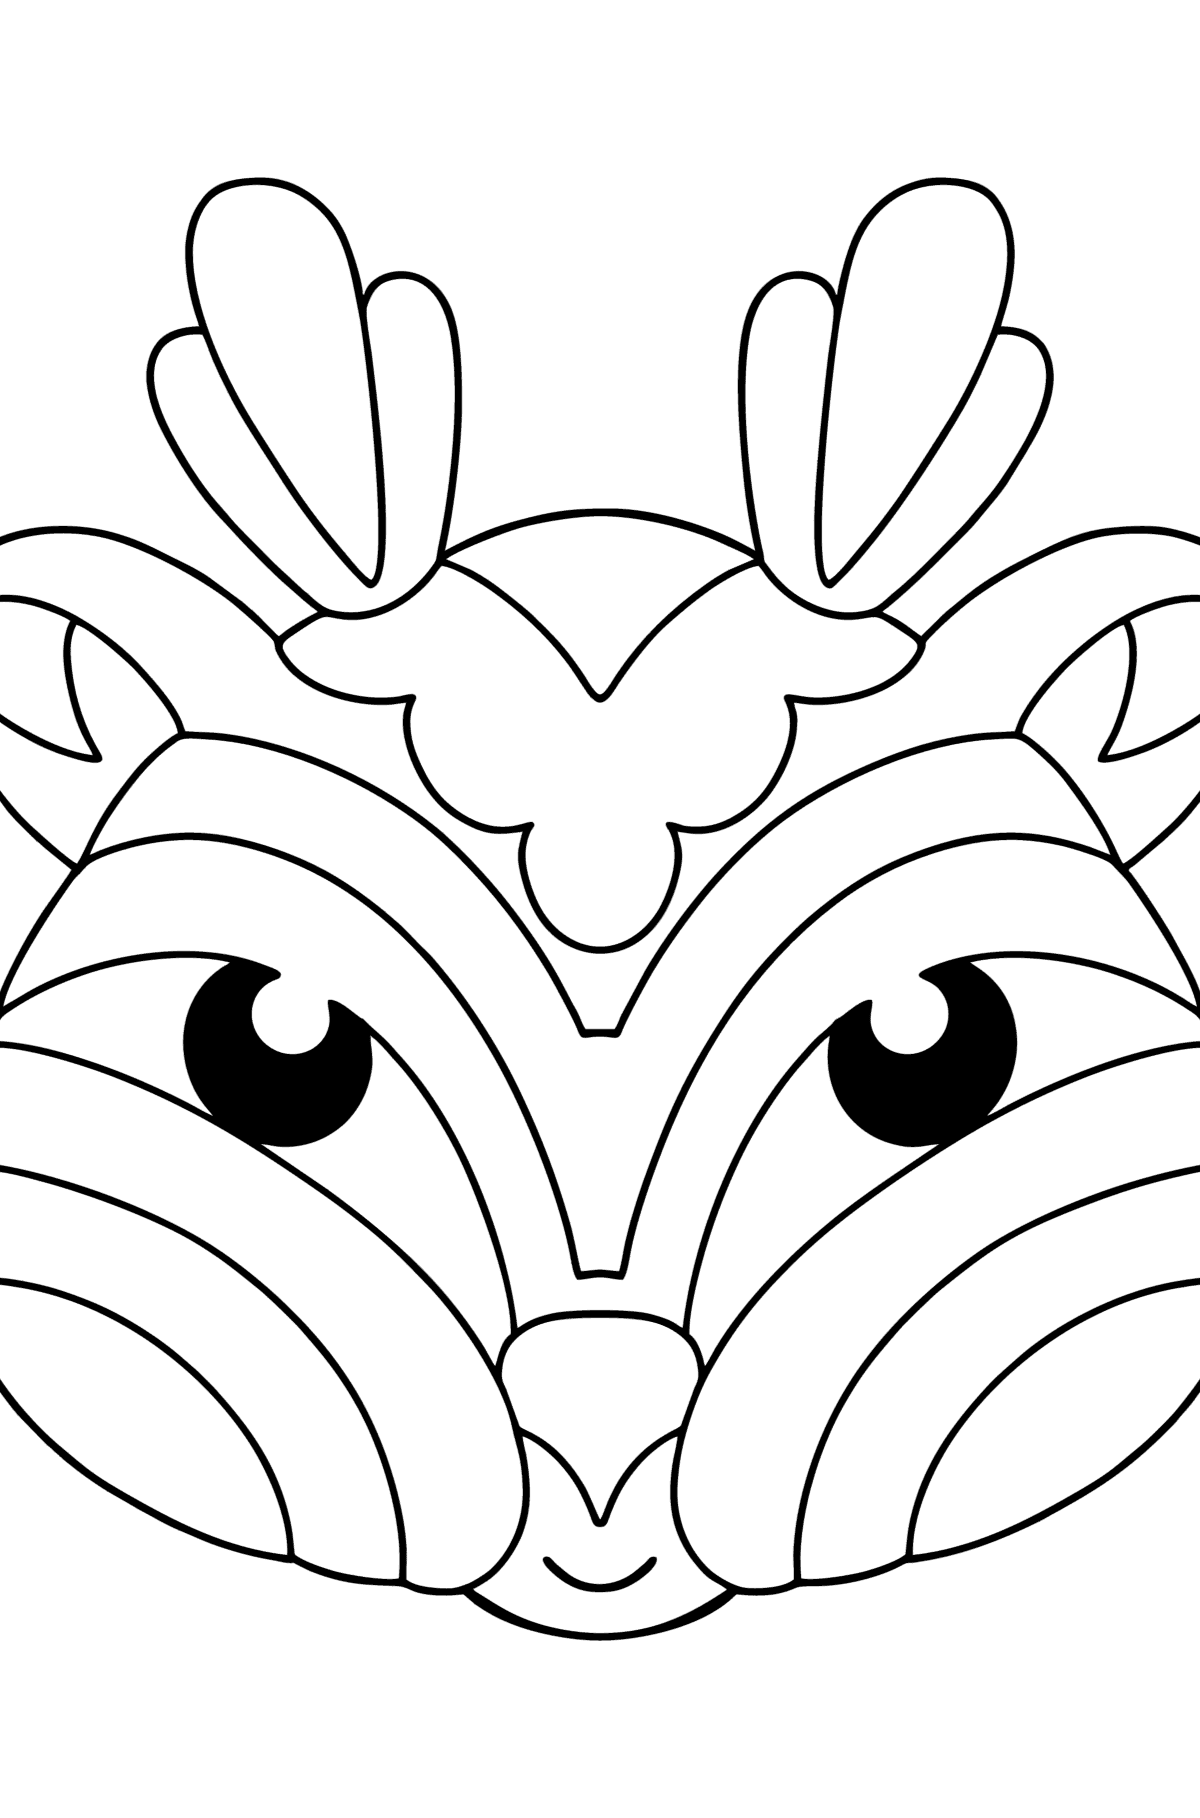 Deer Anti stress coloring page - Coloring Pages for Kids